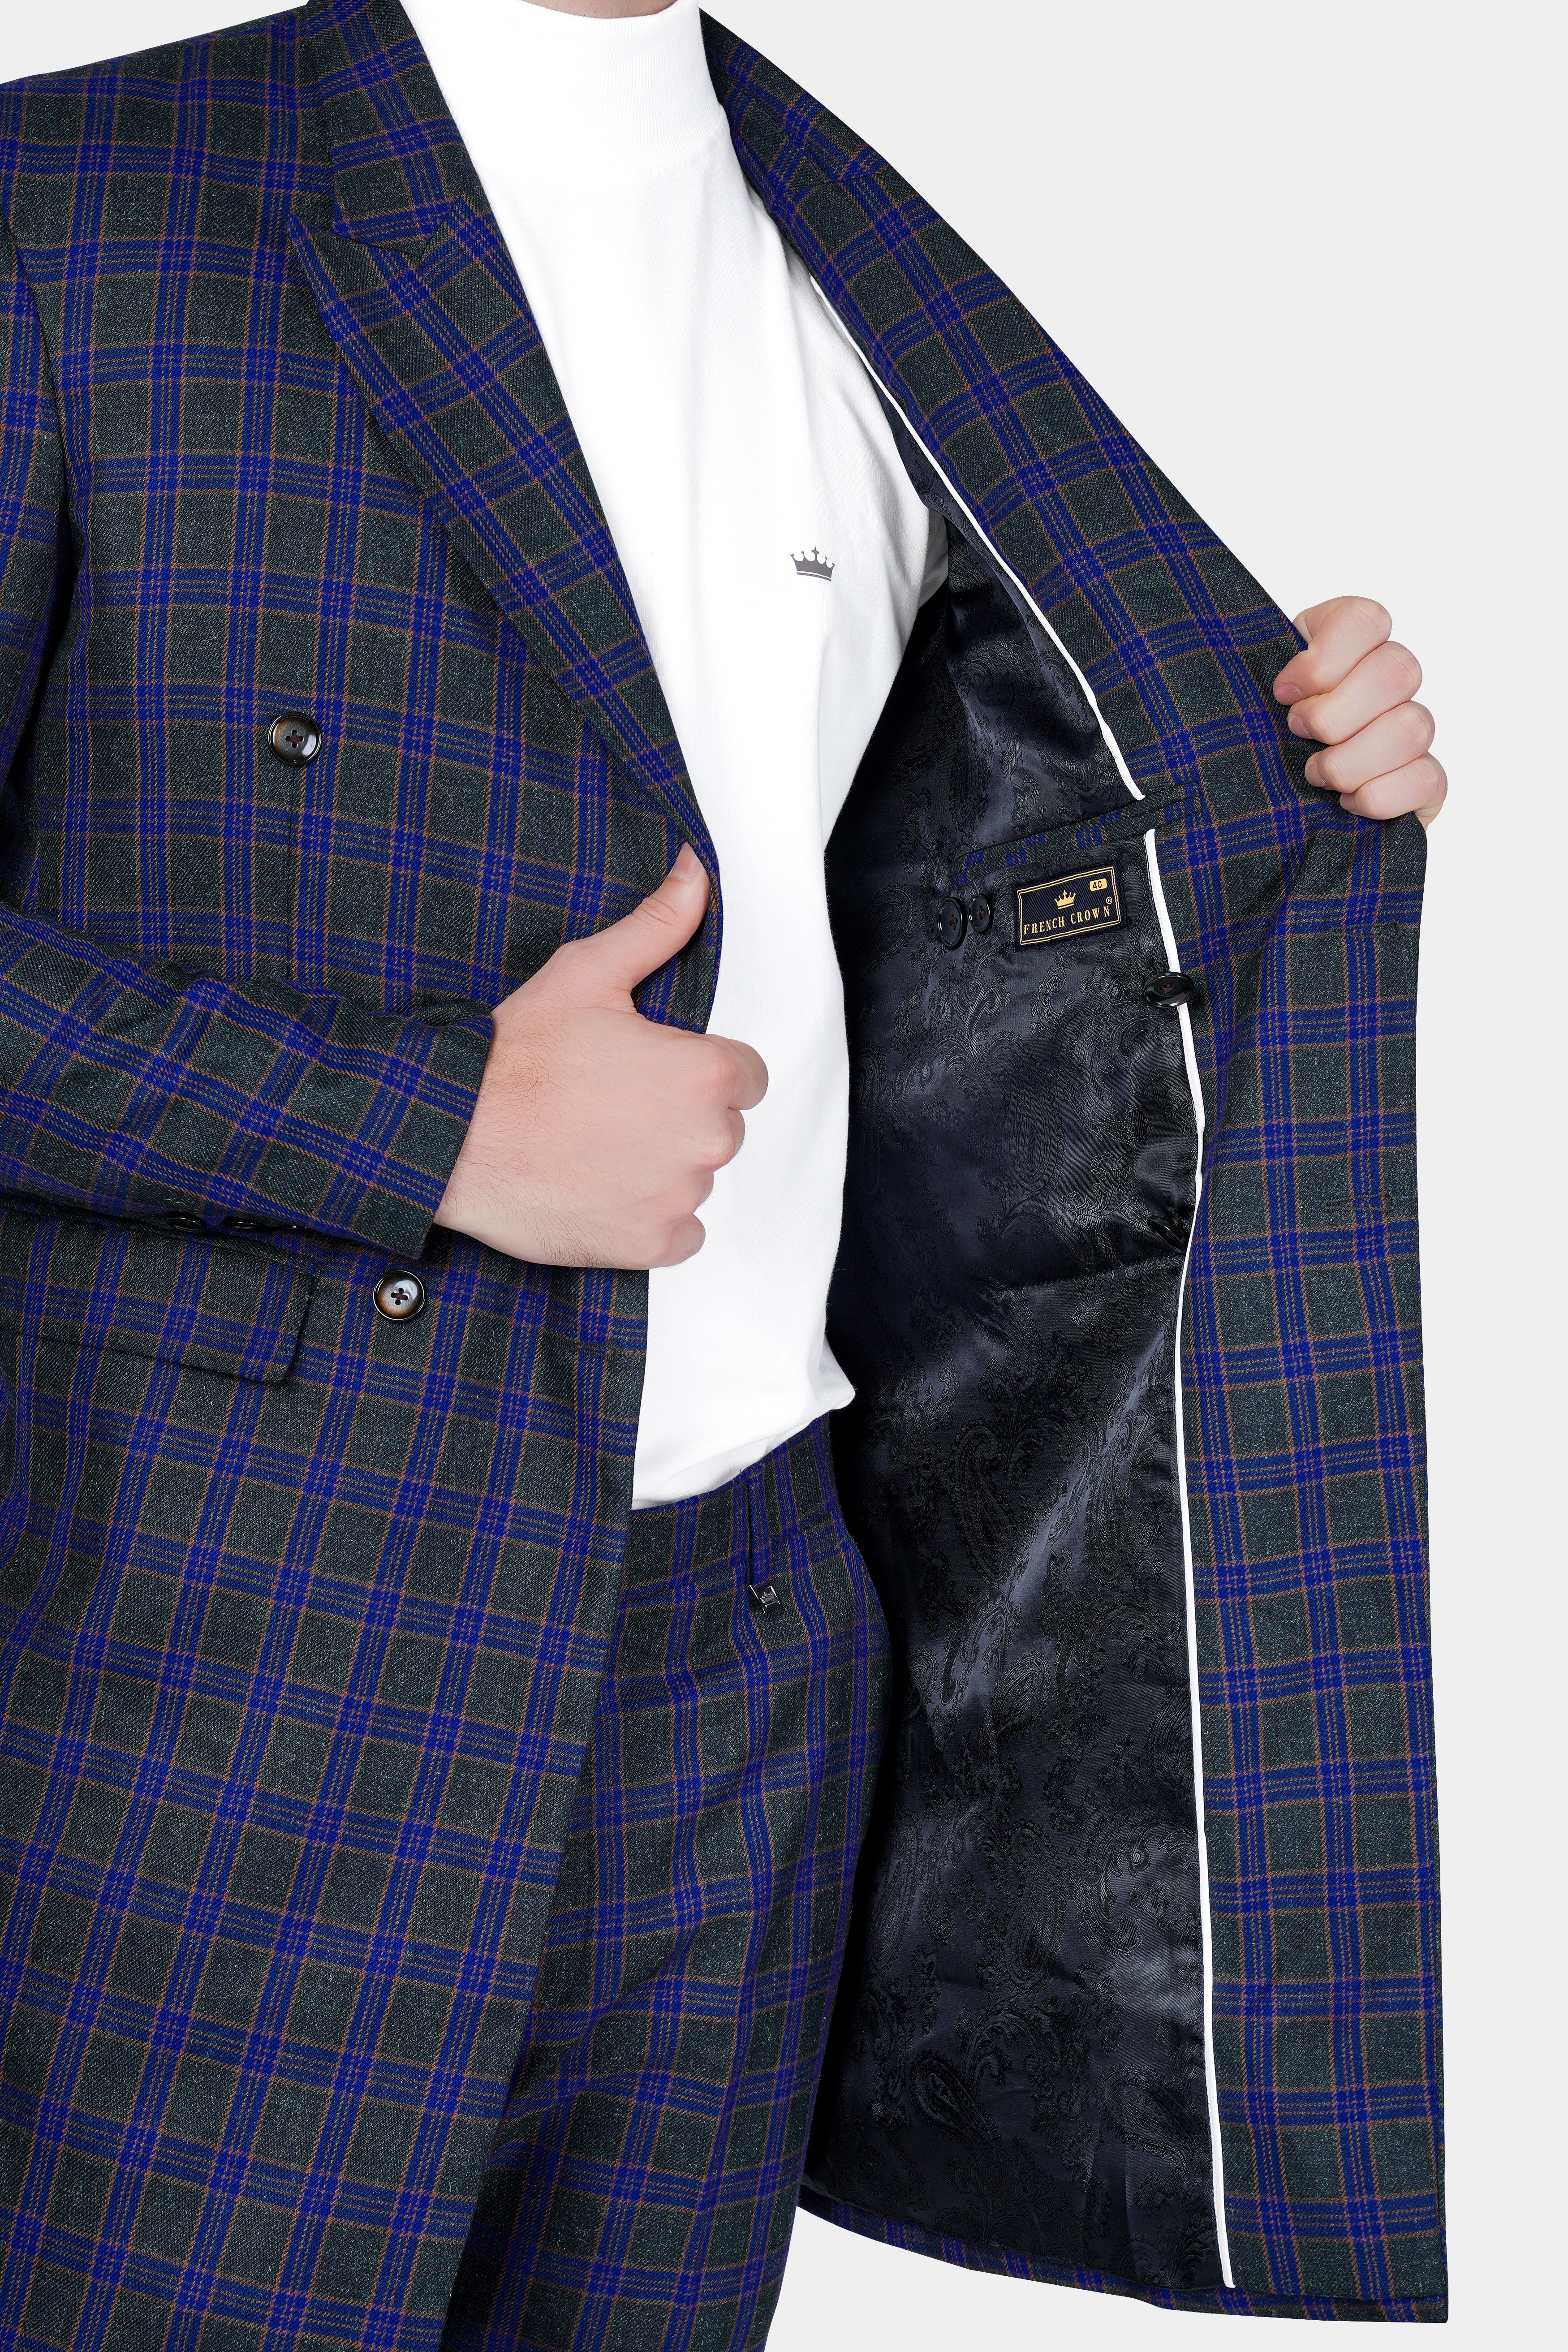 Zodiac Blue and Piano Black Plaid Tweed Double Breasted Trench Coat